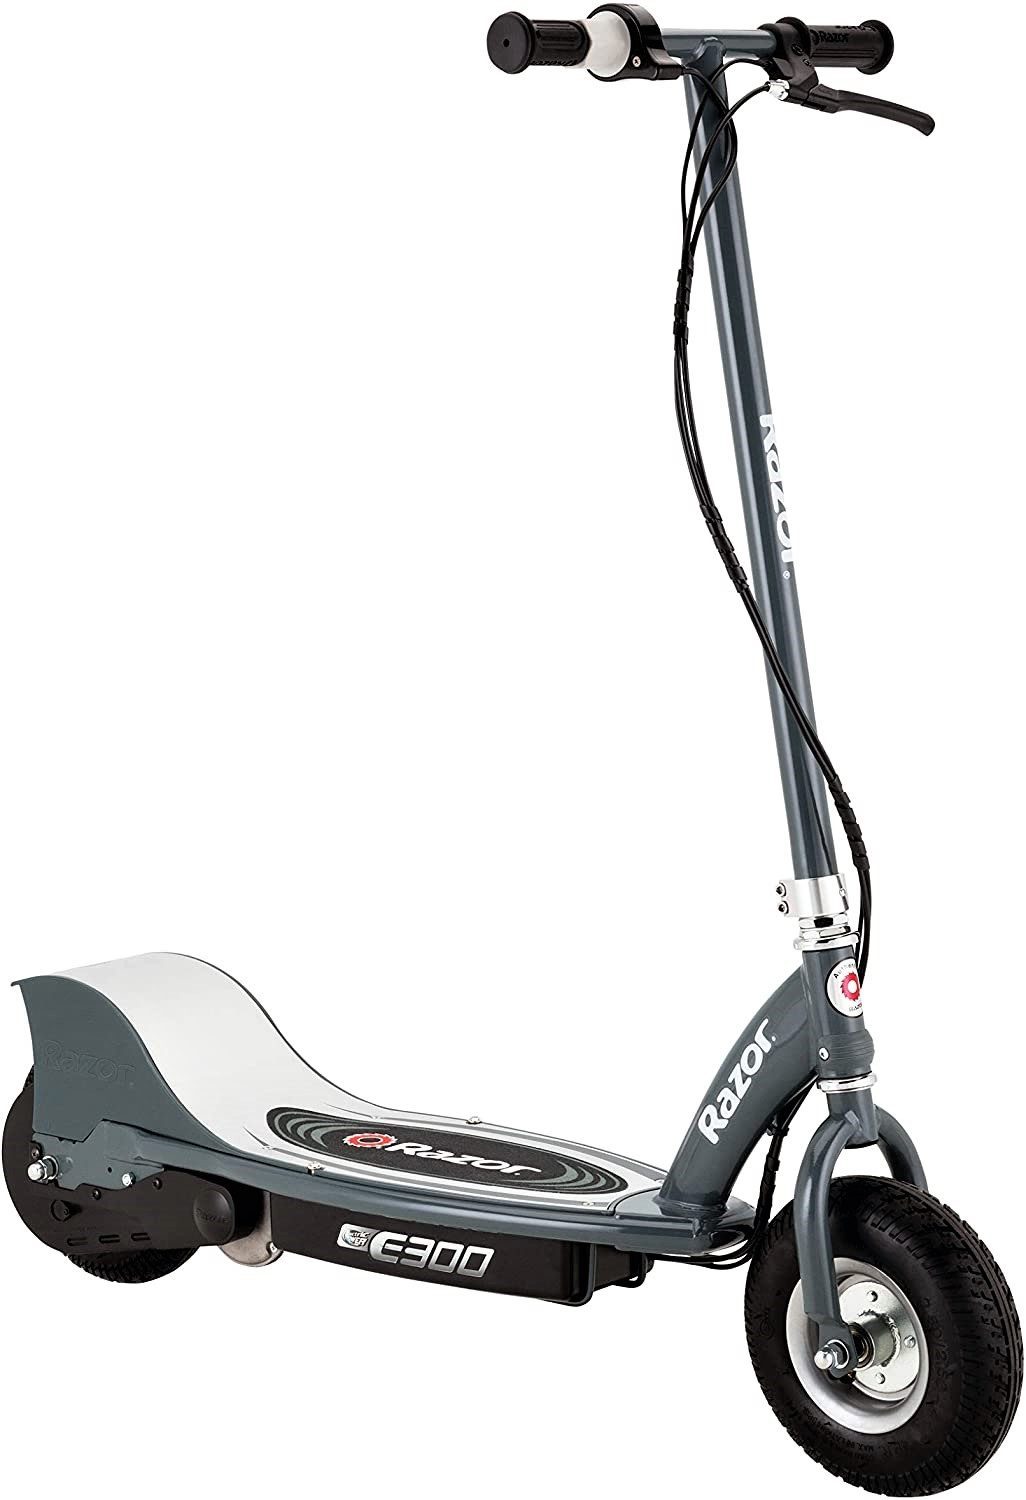 Razor E300 Electric Scooter Review for Adults & Teenagers